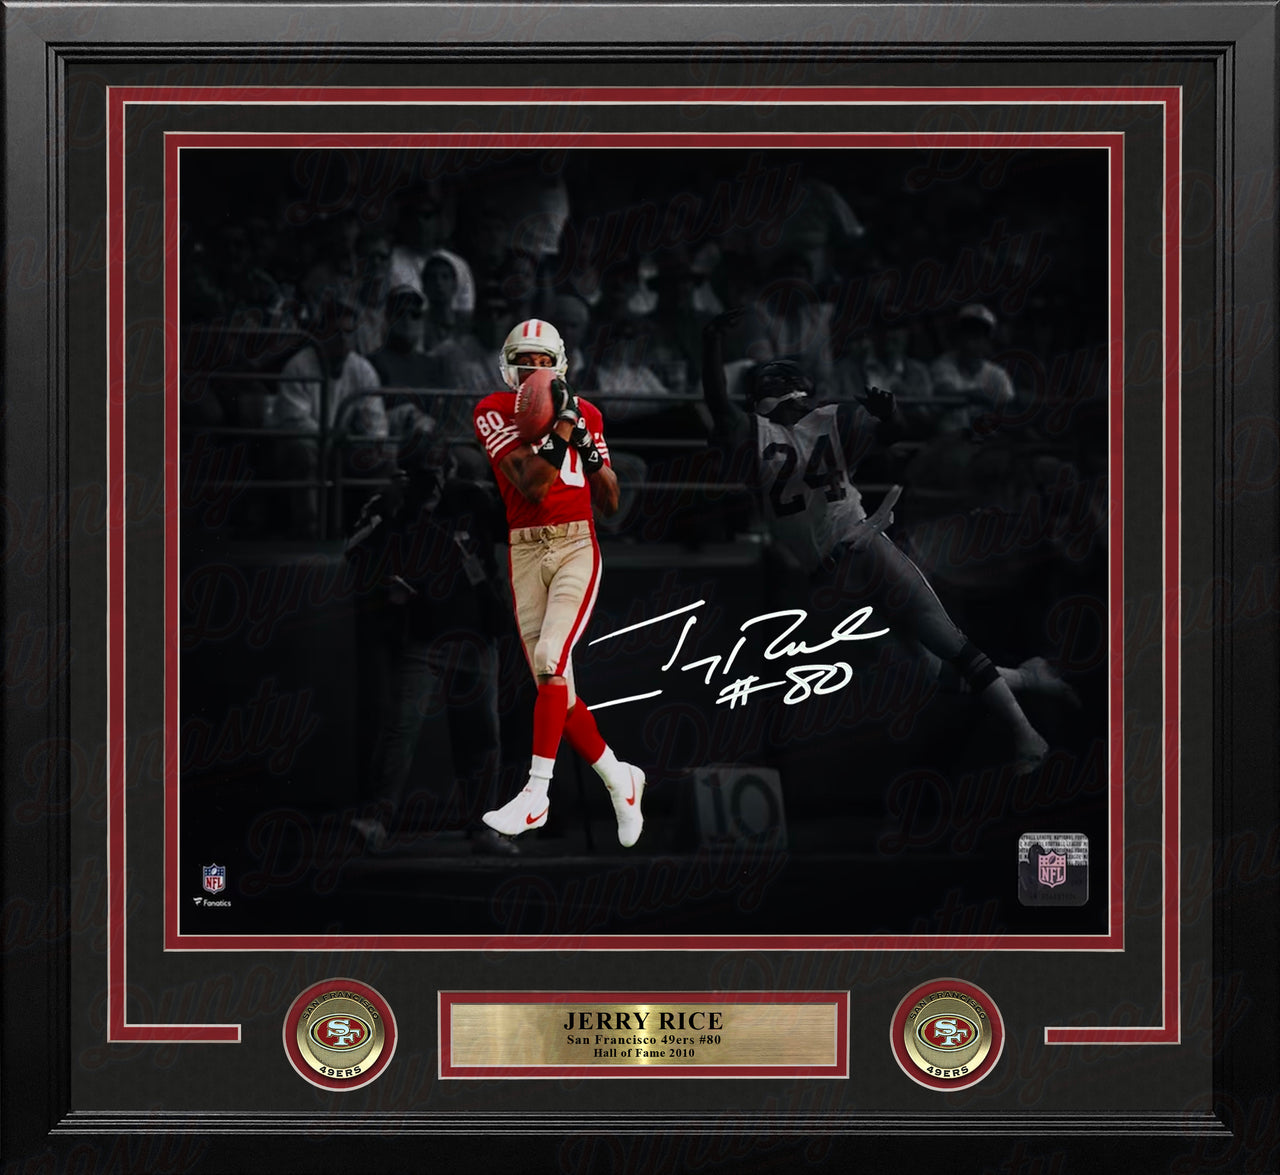 Jerry Rice San Francisco 49ers Autographed 11" x 14" Framed Blackout Football Photo